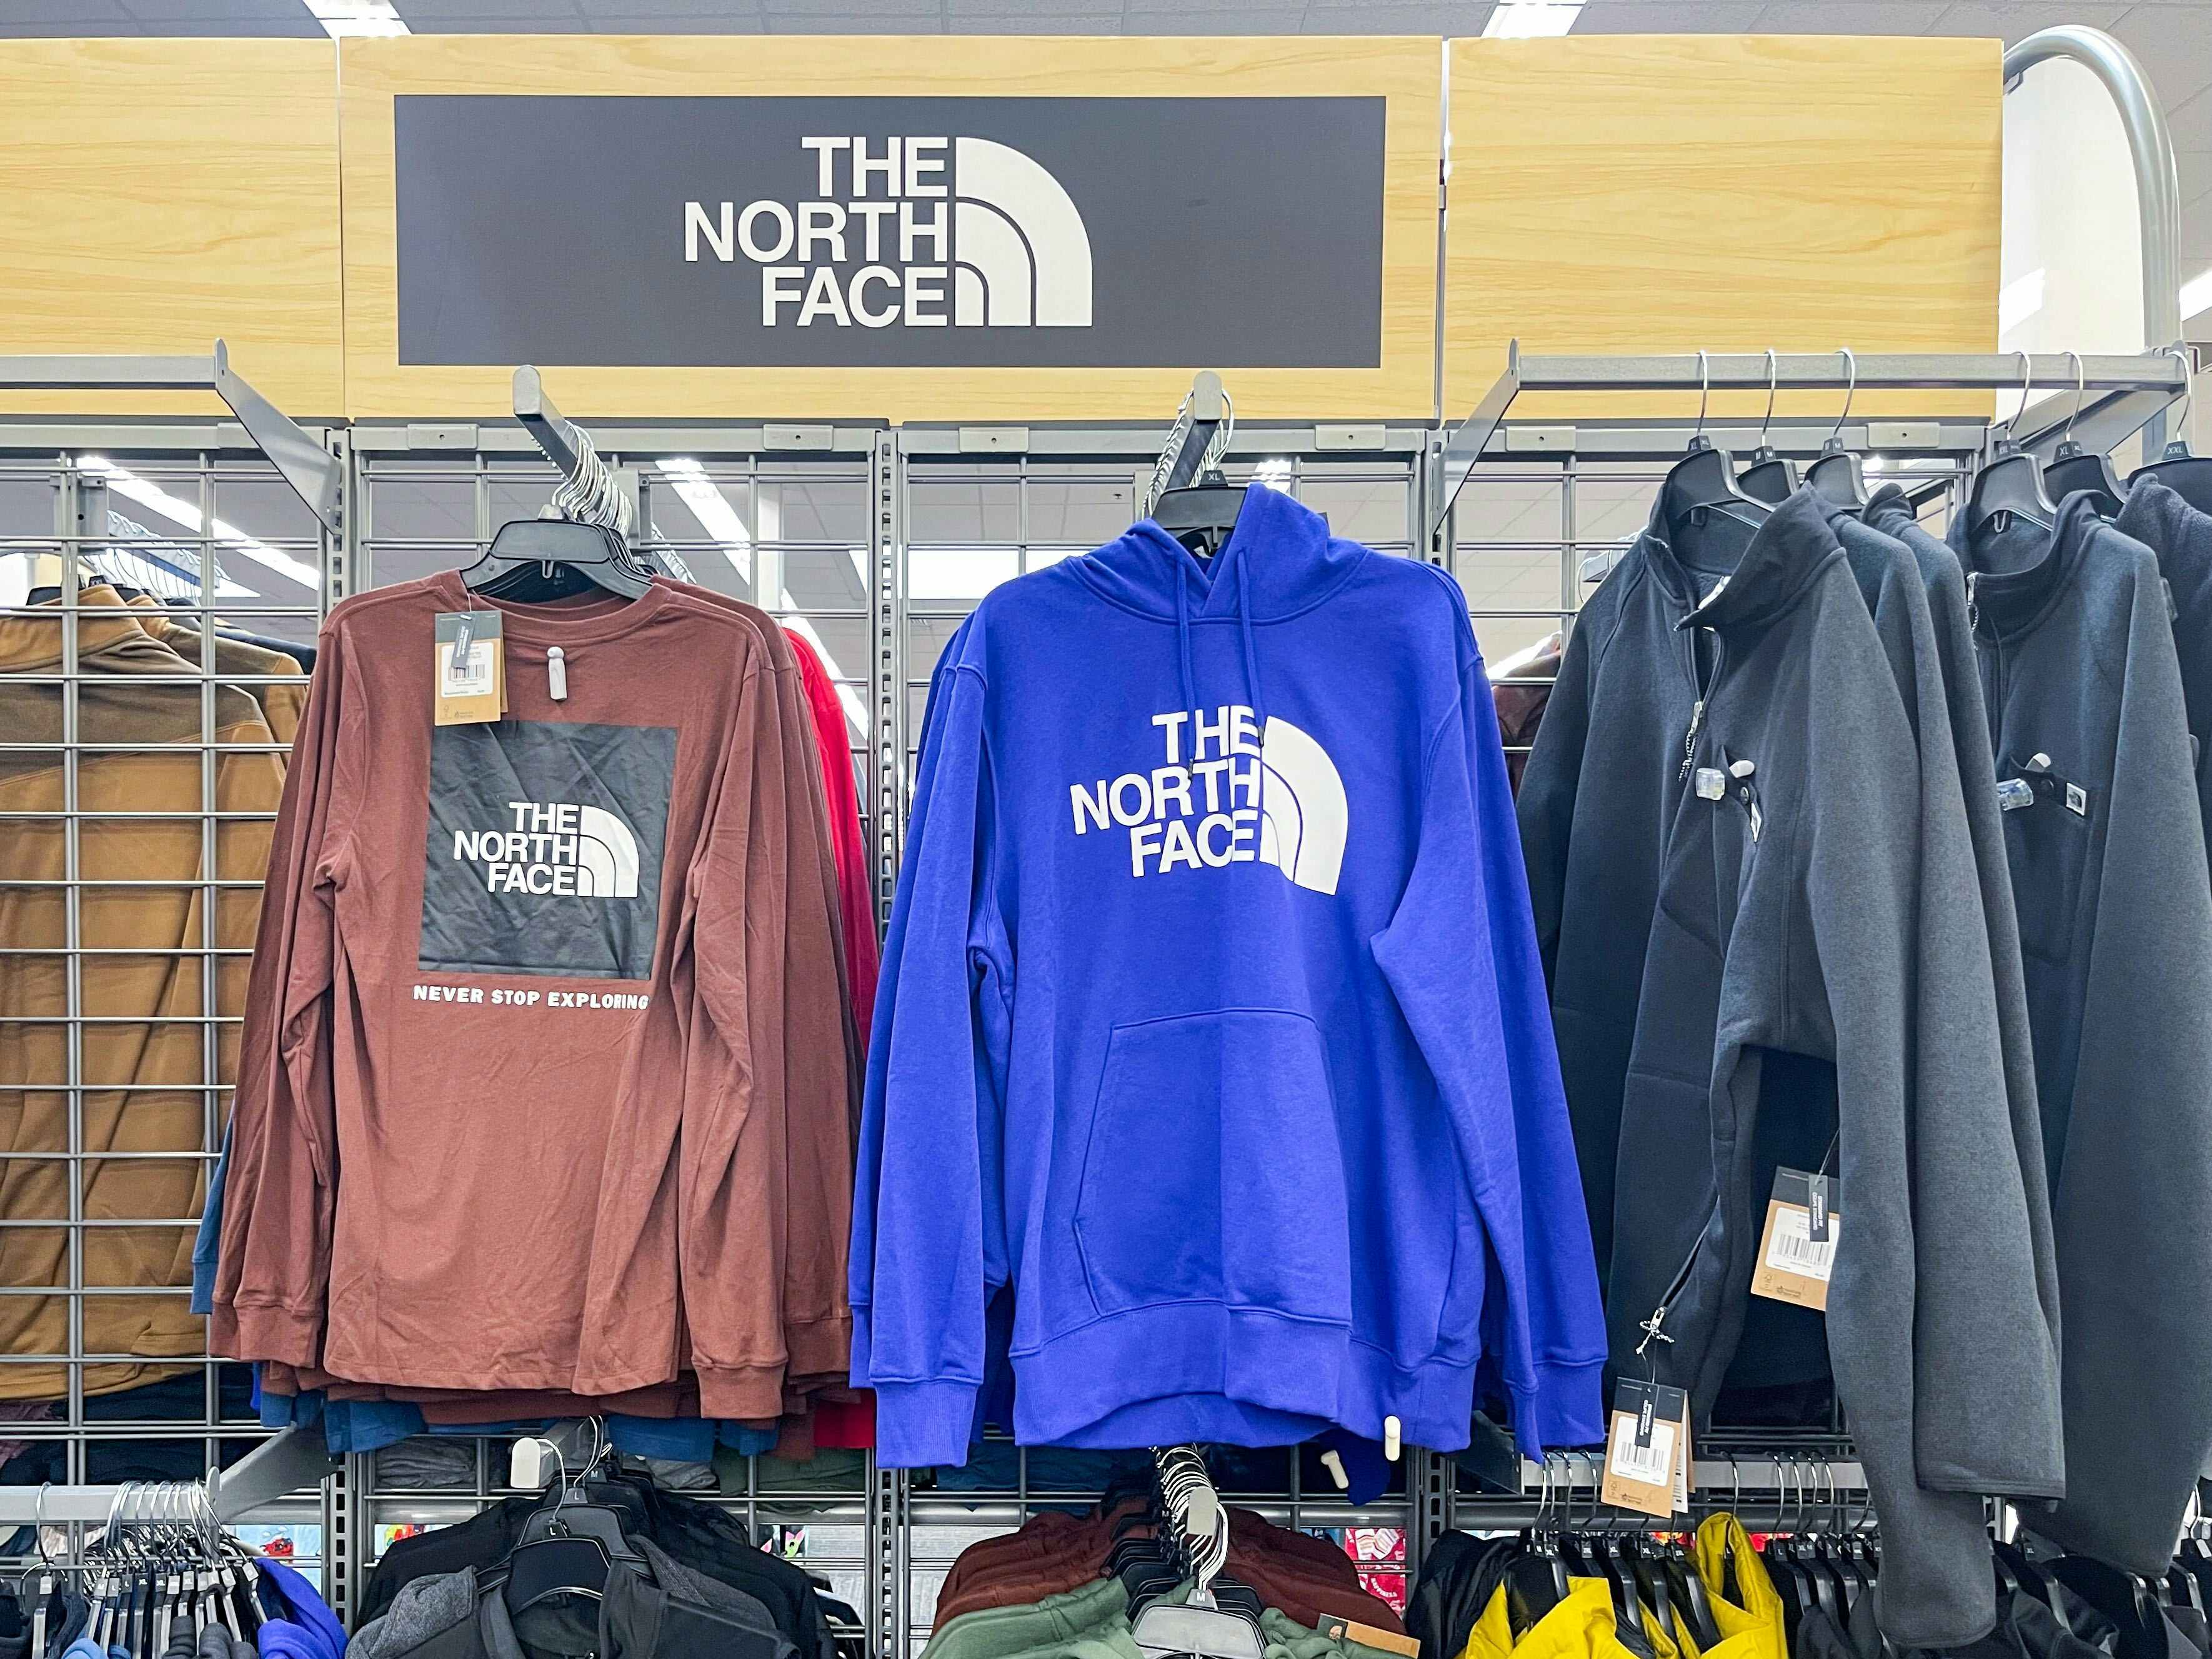 The North Face Hoodies at REI, as Low as $31 for Kids and $42 for Adults